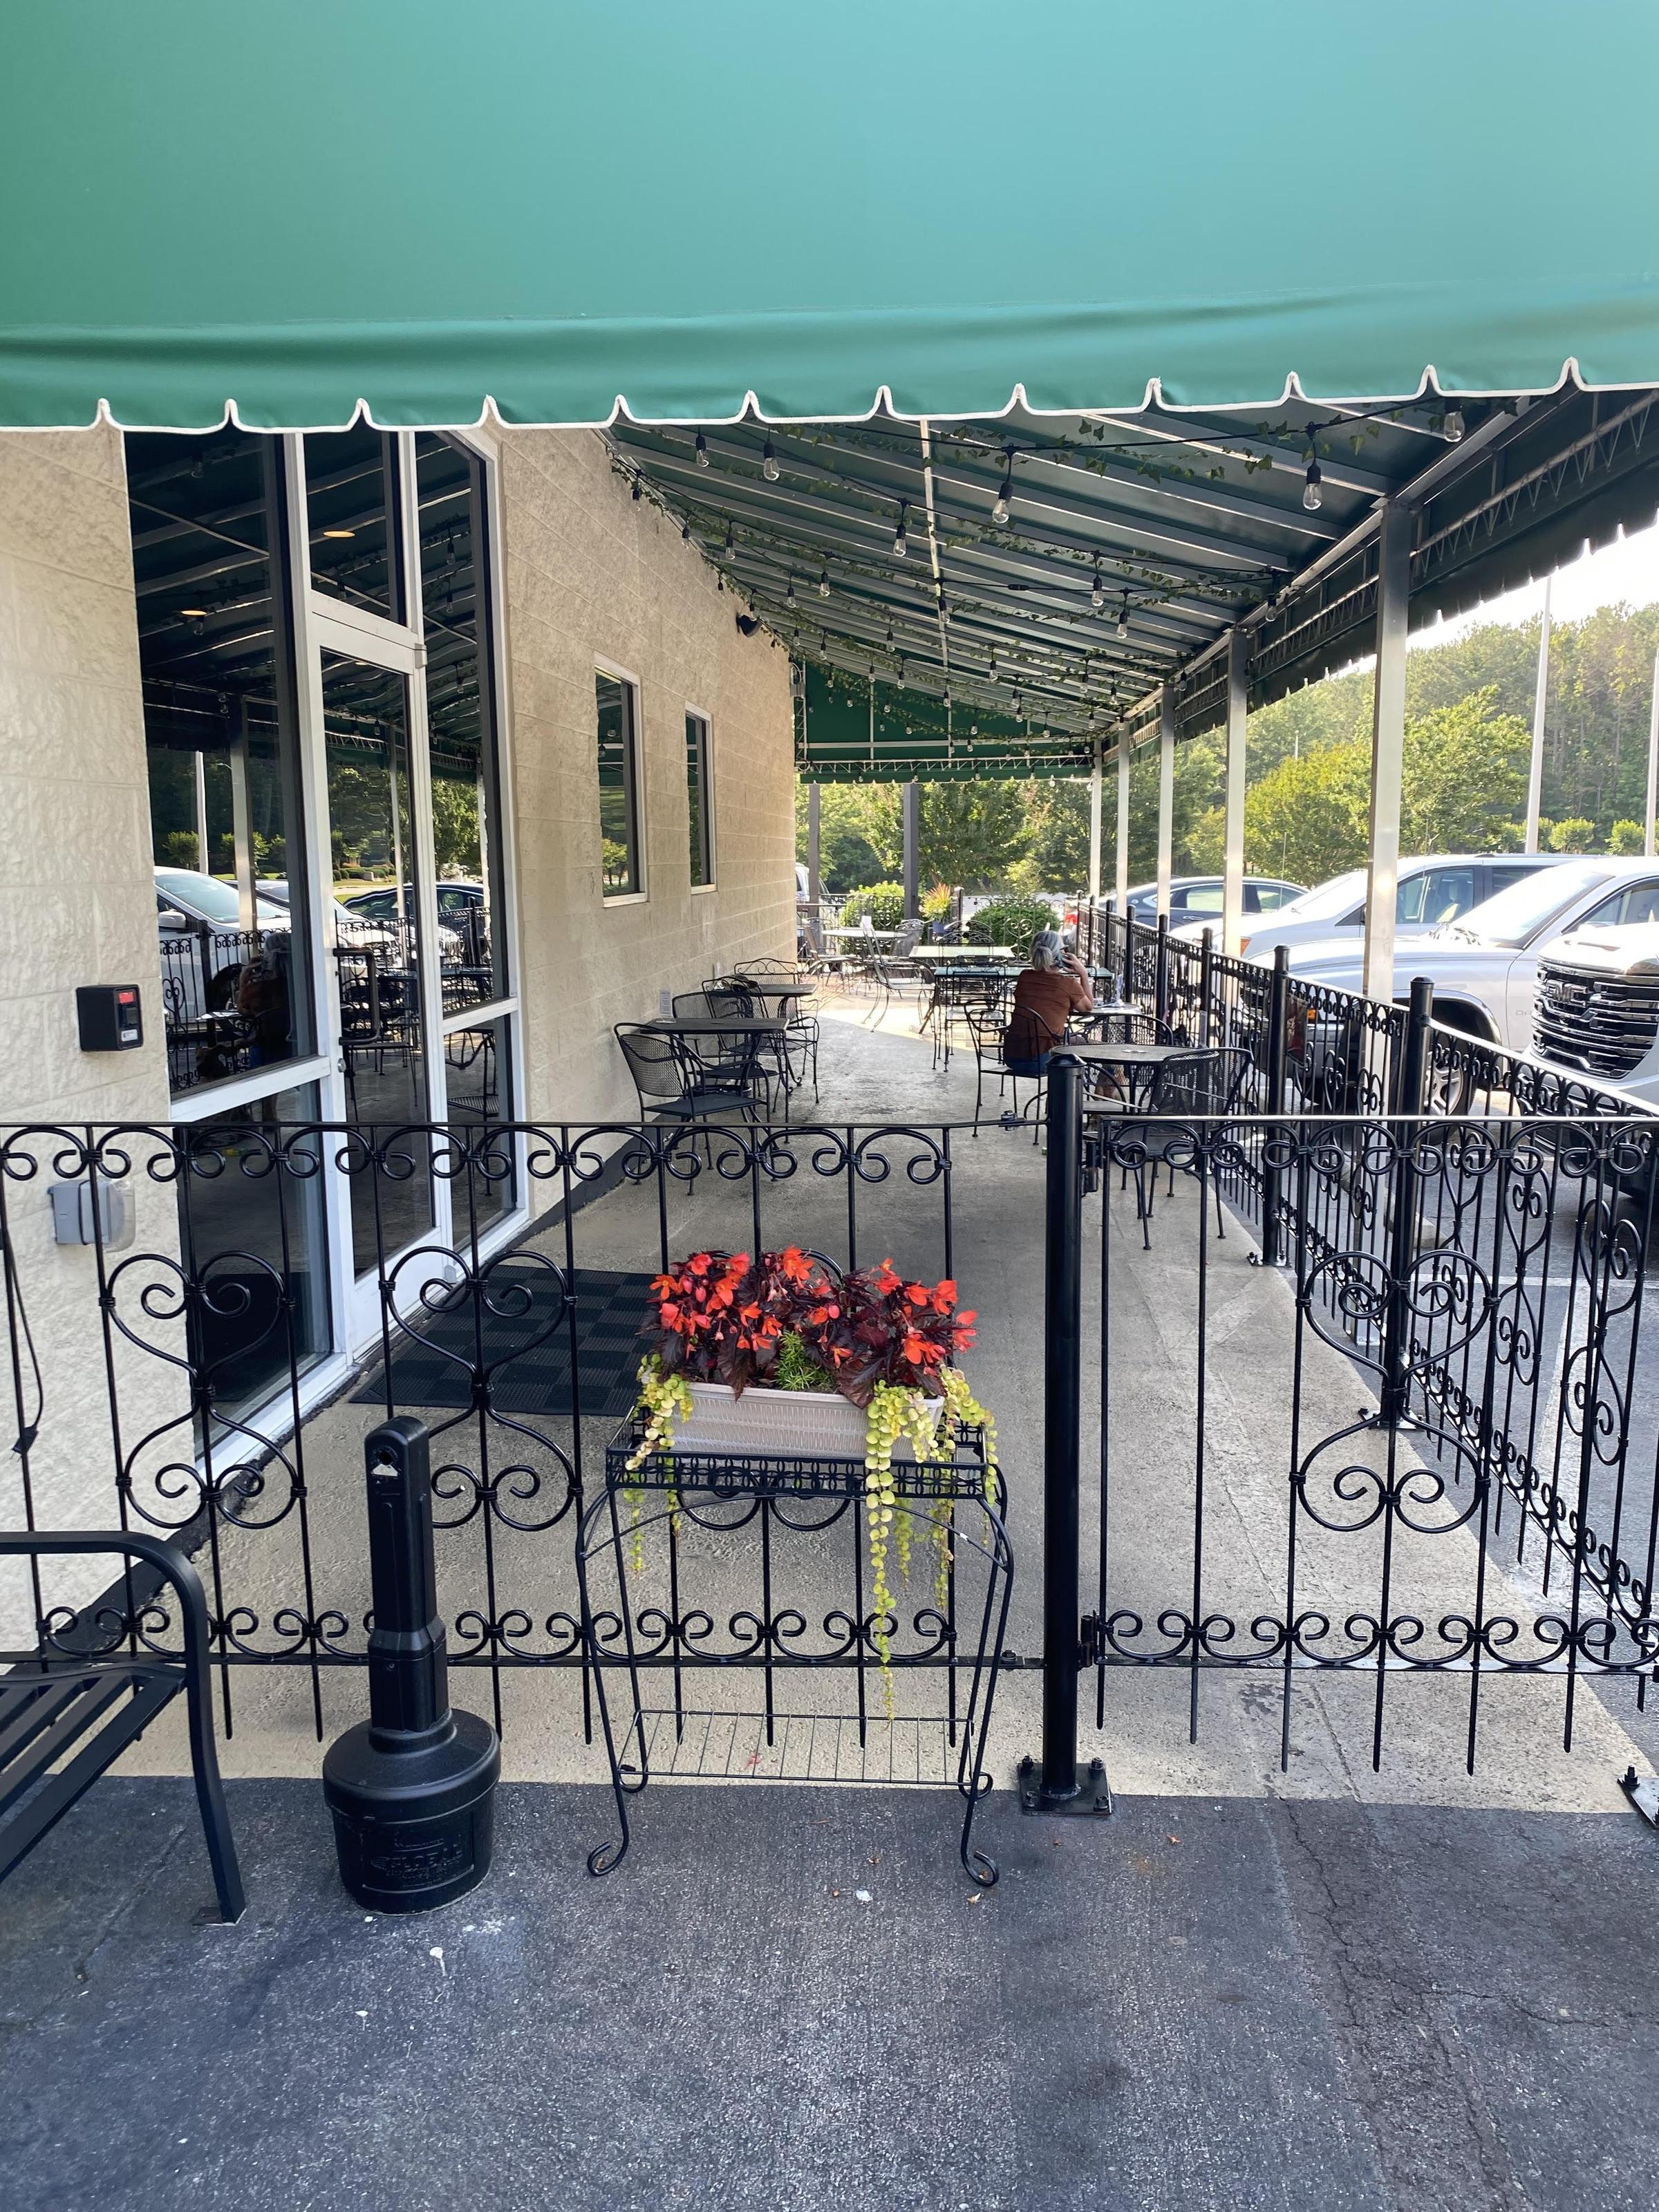 Pet Friendly The Garden State Grill